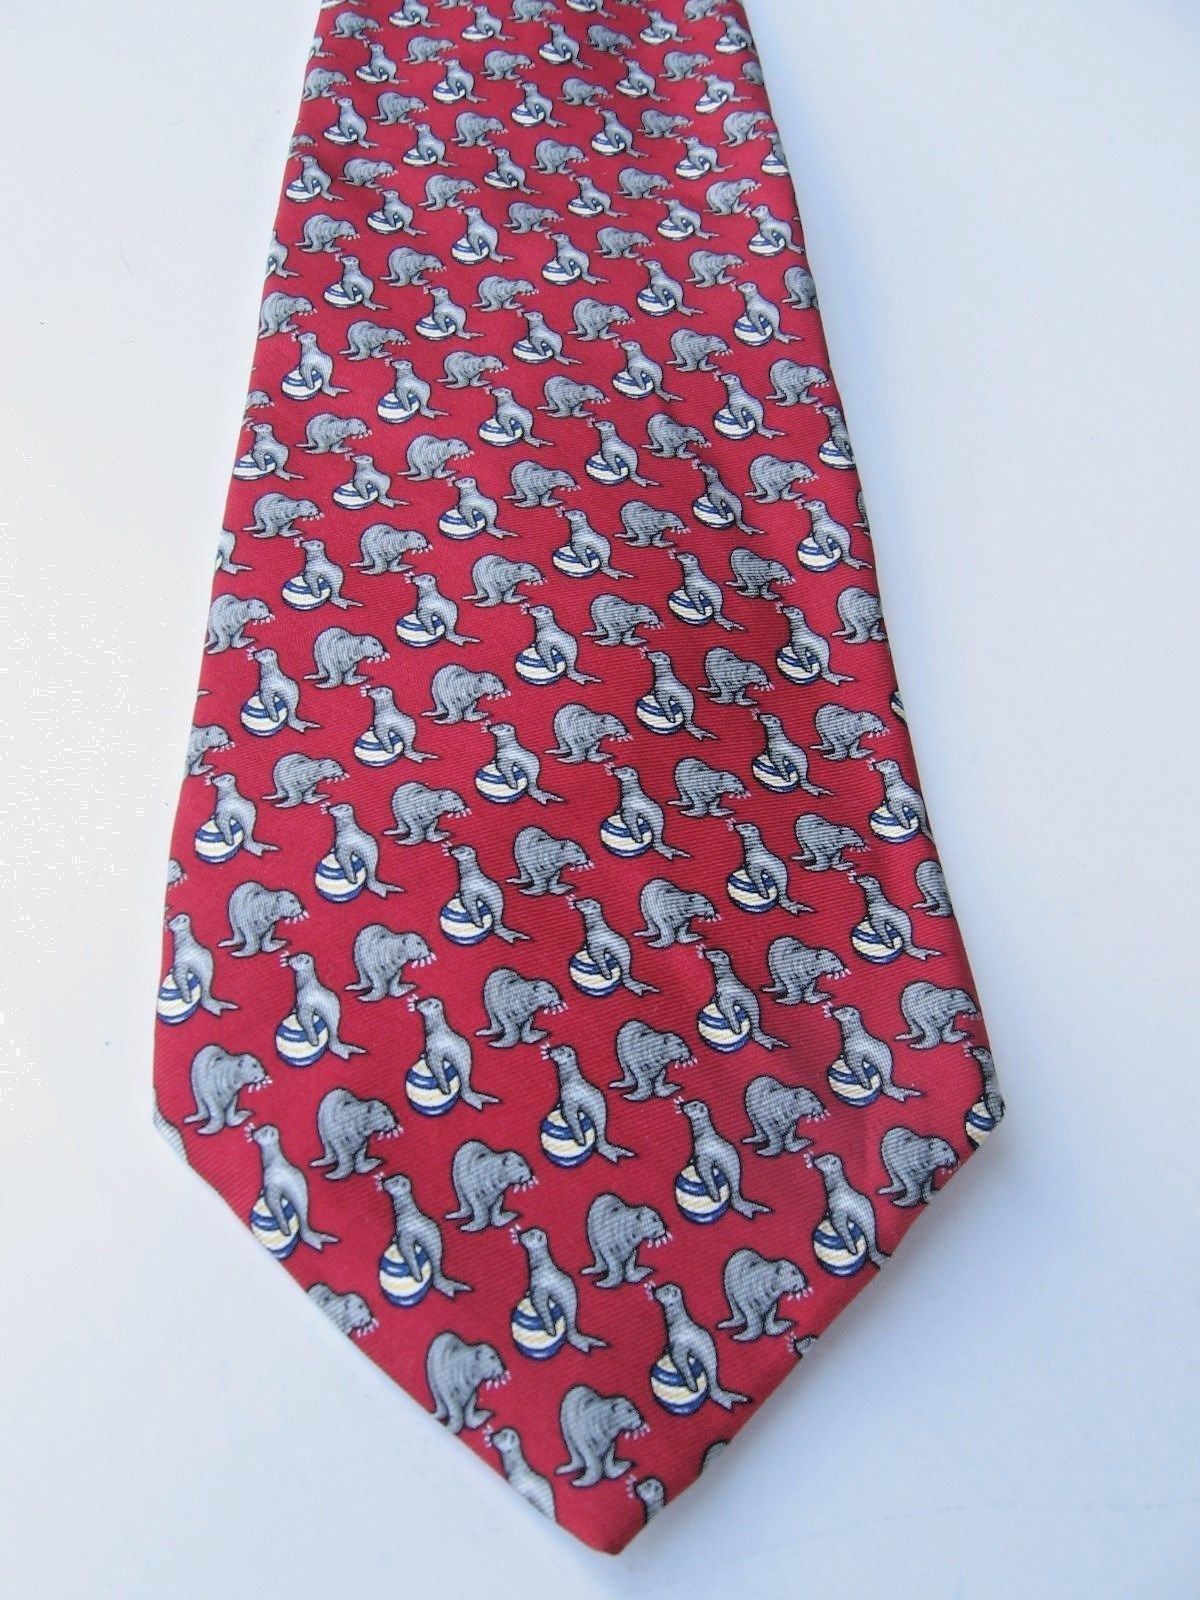 Brooks Basics Pure Silk Tie Red w Seals Made in USA 3 3/4" Wide Imported Fabric - $33.87